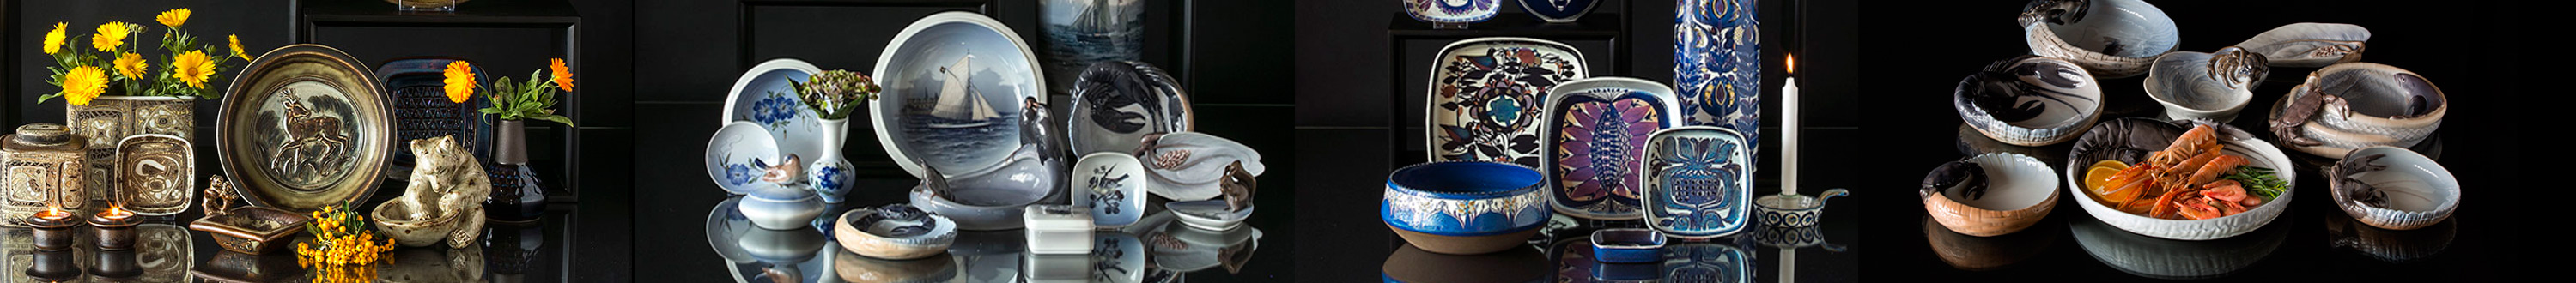 Dishes and bowls in porcelain, ceramics, stoneware, faience, glass, brass, silver, etc.